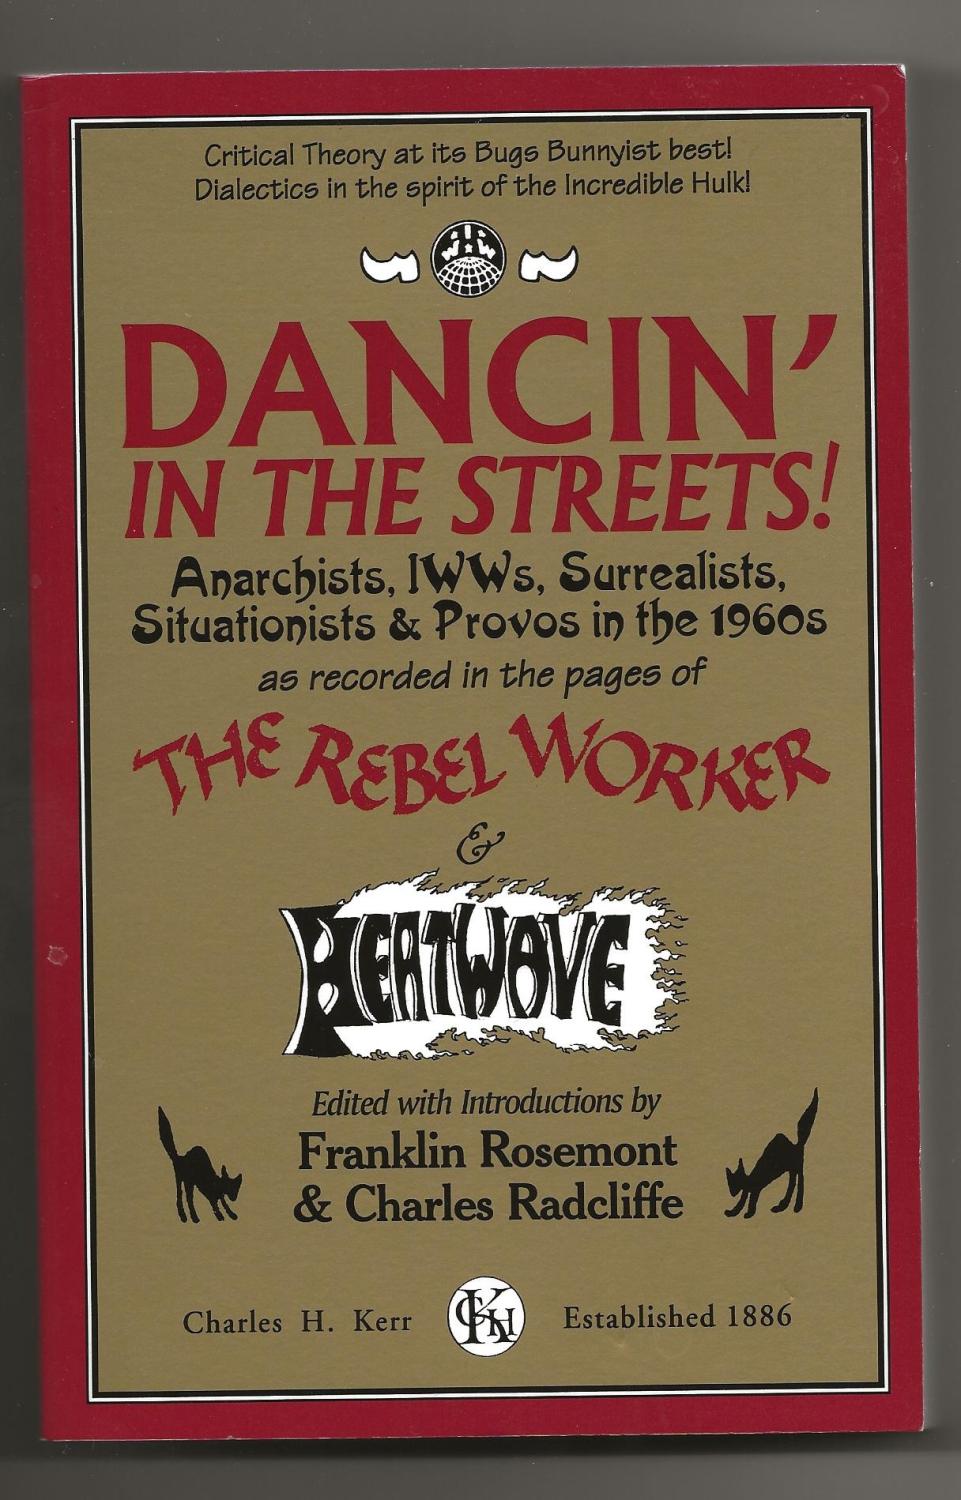 Dancin' In The Streets!: Anarchists, IWWs, Surrealists, Situationists & Provos In The 1960s - As Recorded In The Pages Of The Rebel Worker & Heatwave (Sixties Series) - Franklin Rosemont; Charles Radcliffe